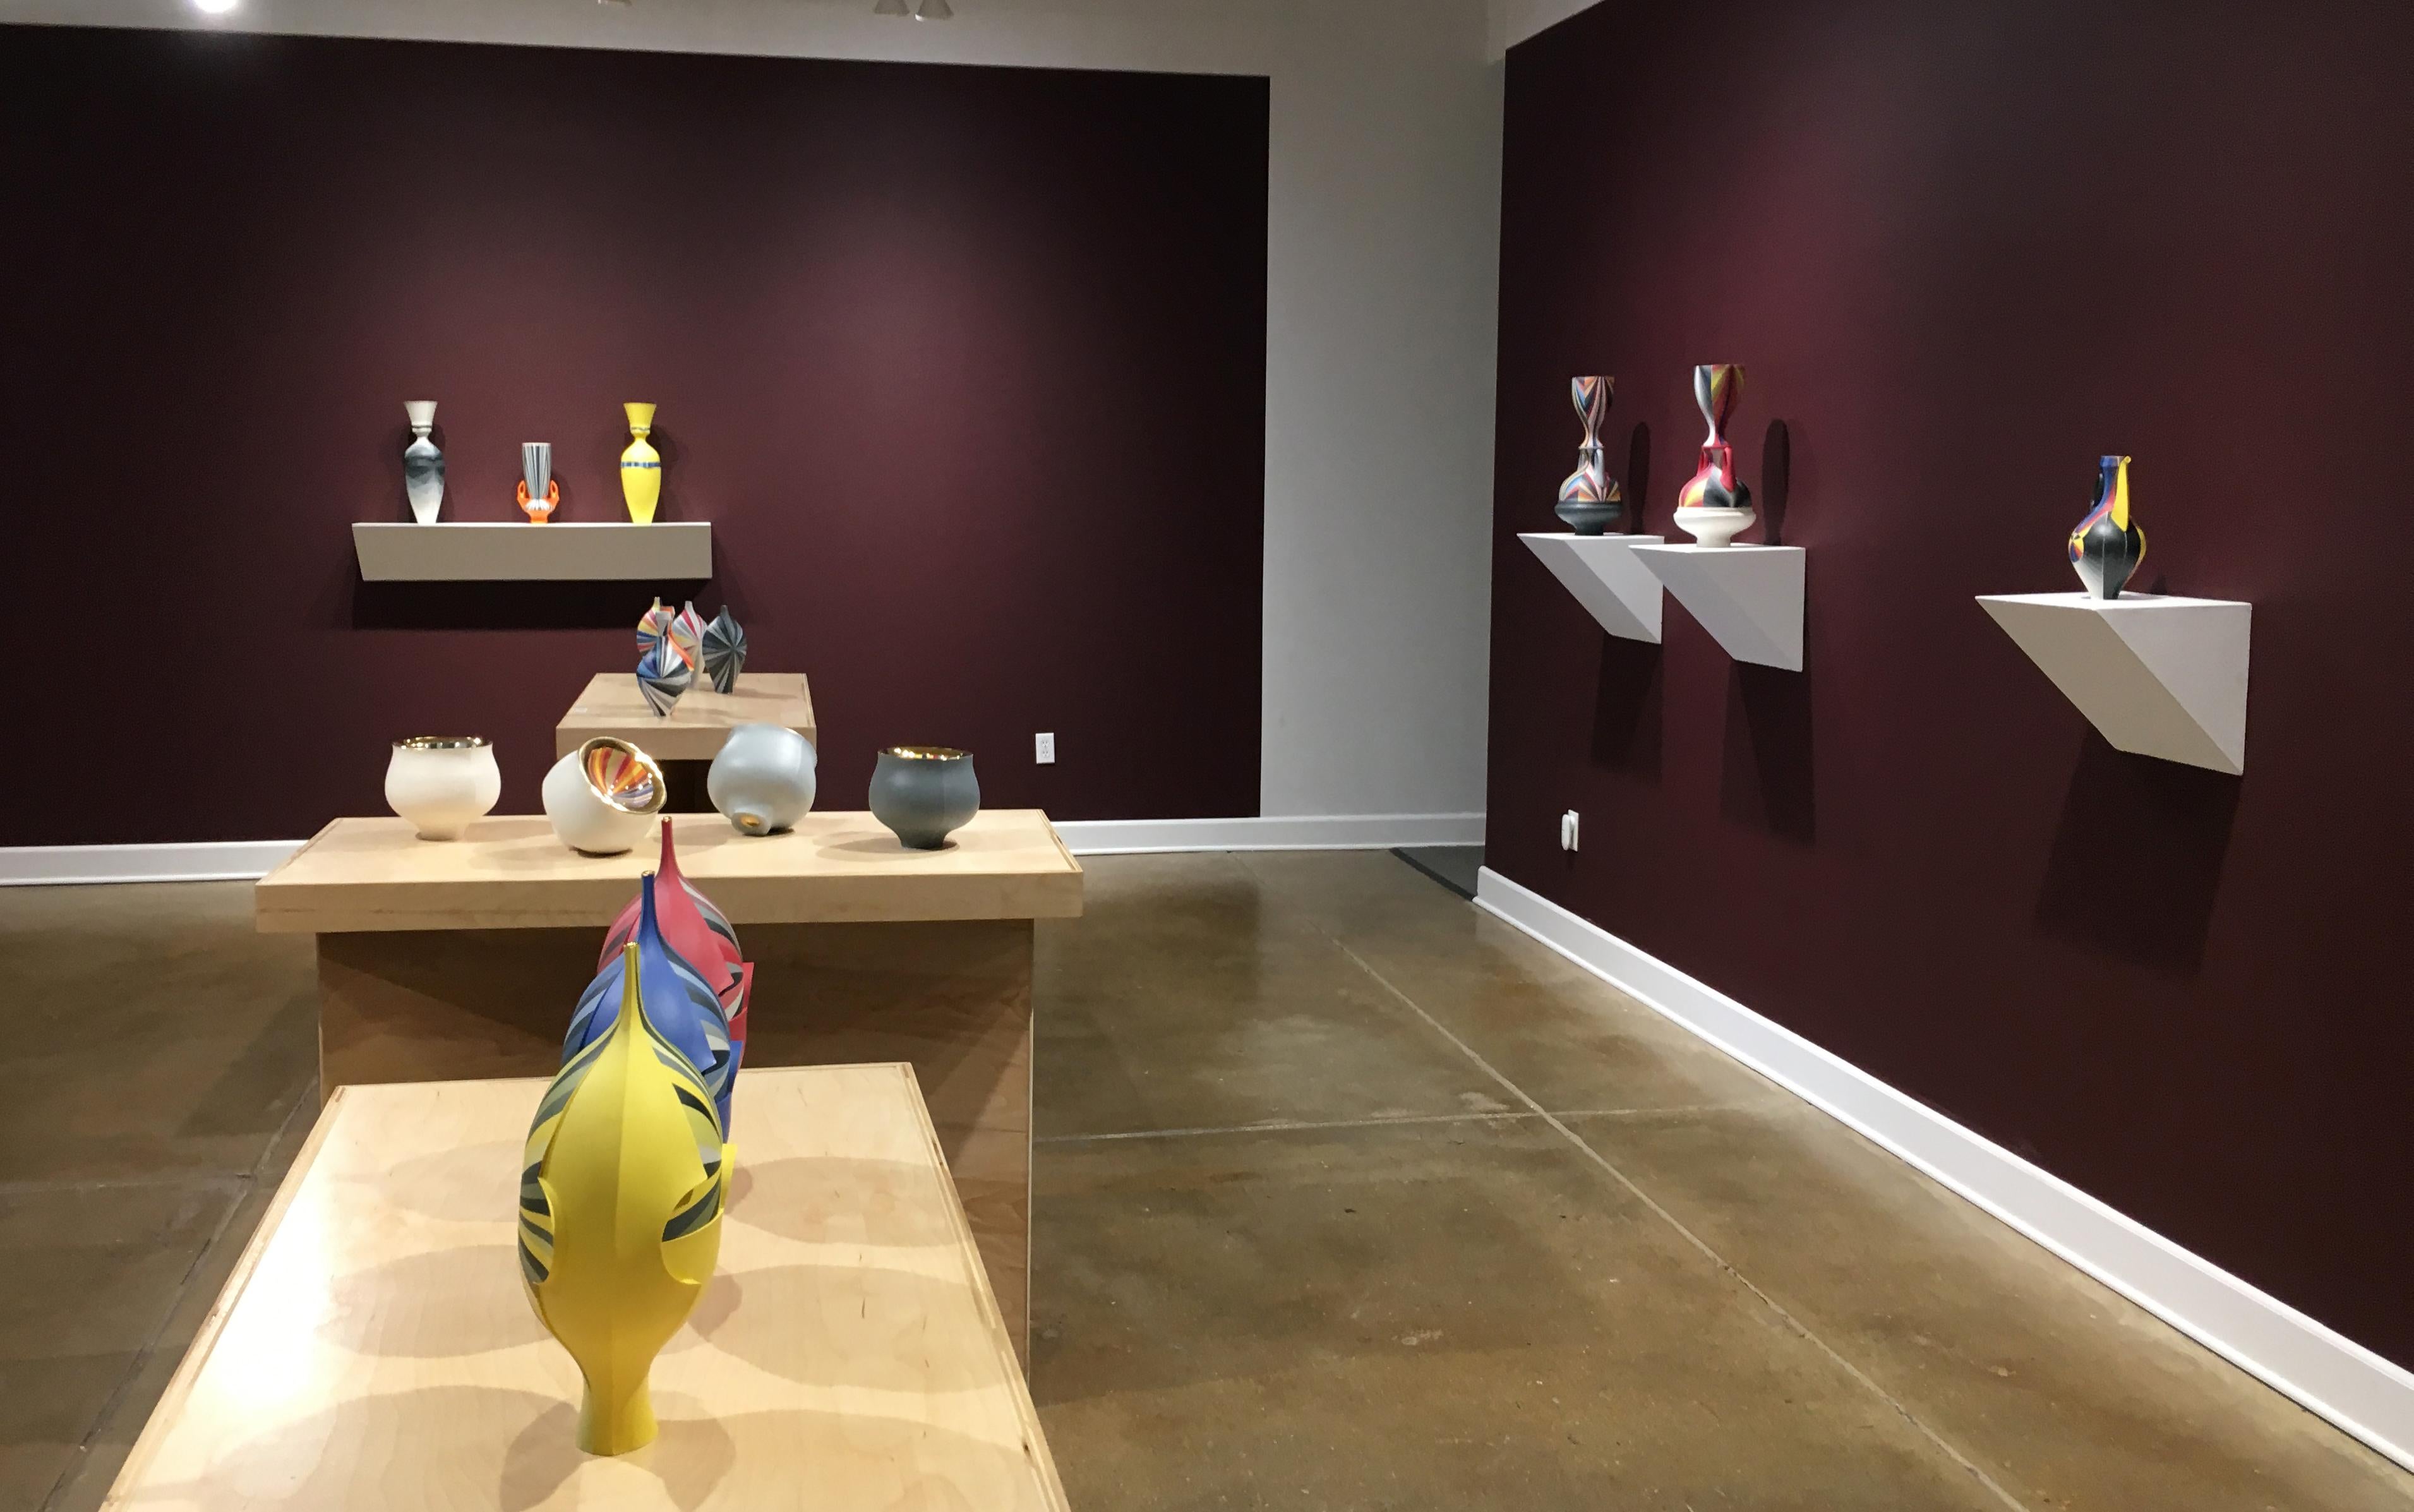 Born in Rochester, NY, Peter Pincus is a ceramic artist and instructor. Peter received his BFA (2005) and MFA (2011) in ceramics from Alfred University, and in between was a resident artist at the Mendocino Art Center in Mendocino, California. Since